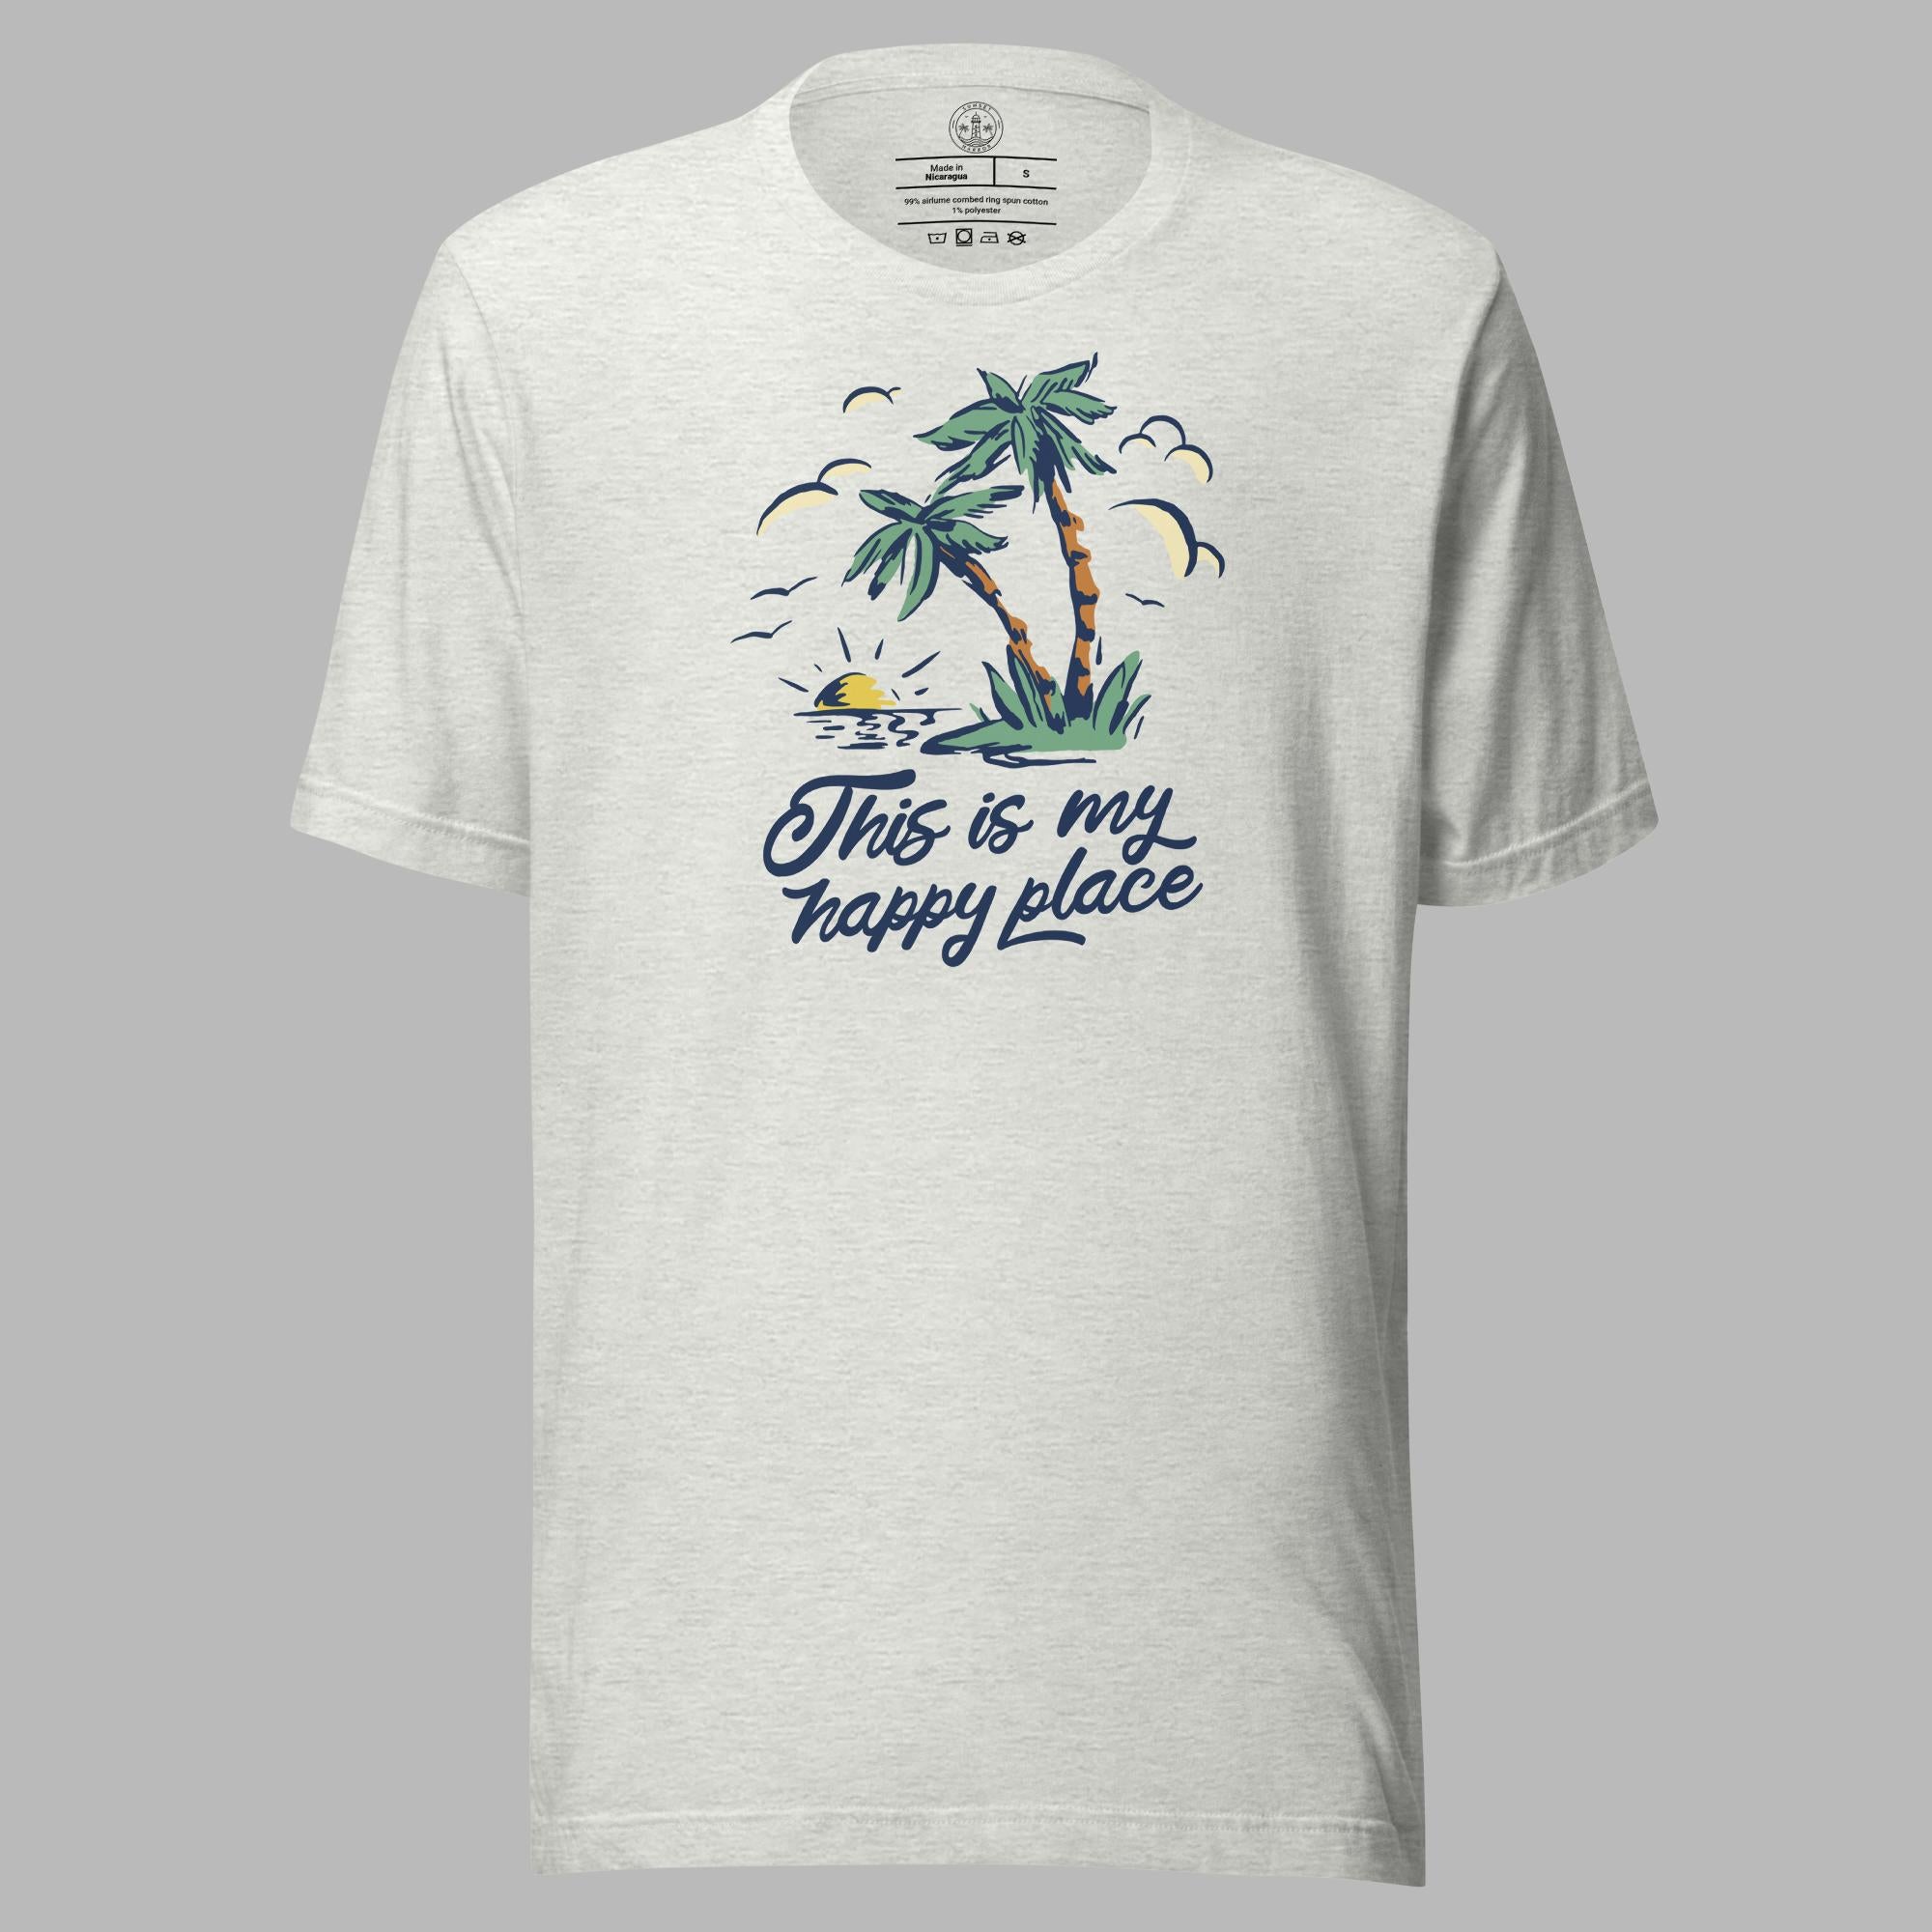 Unisex t-shirt - This is my Happy Place - Sunset Harbor Clothing